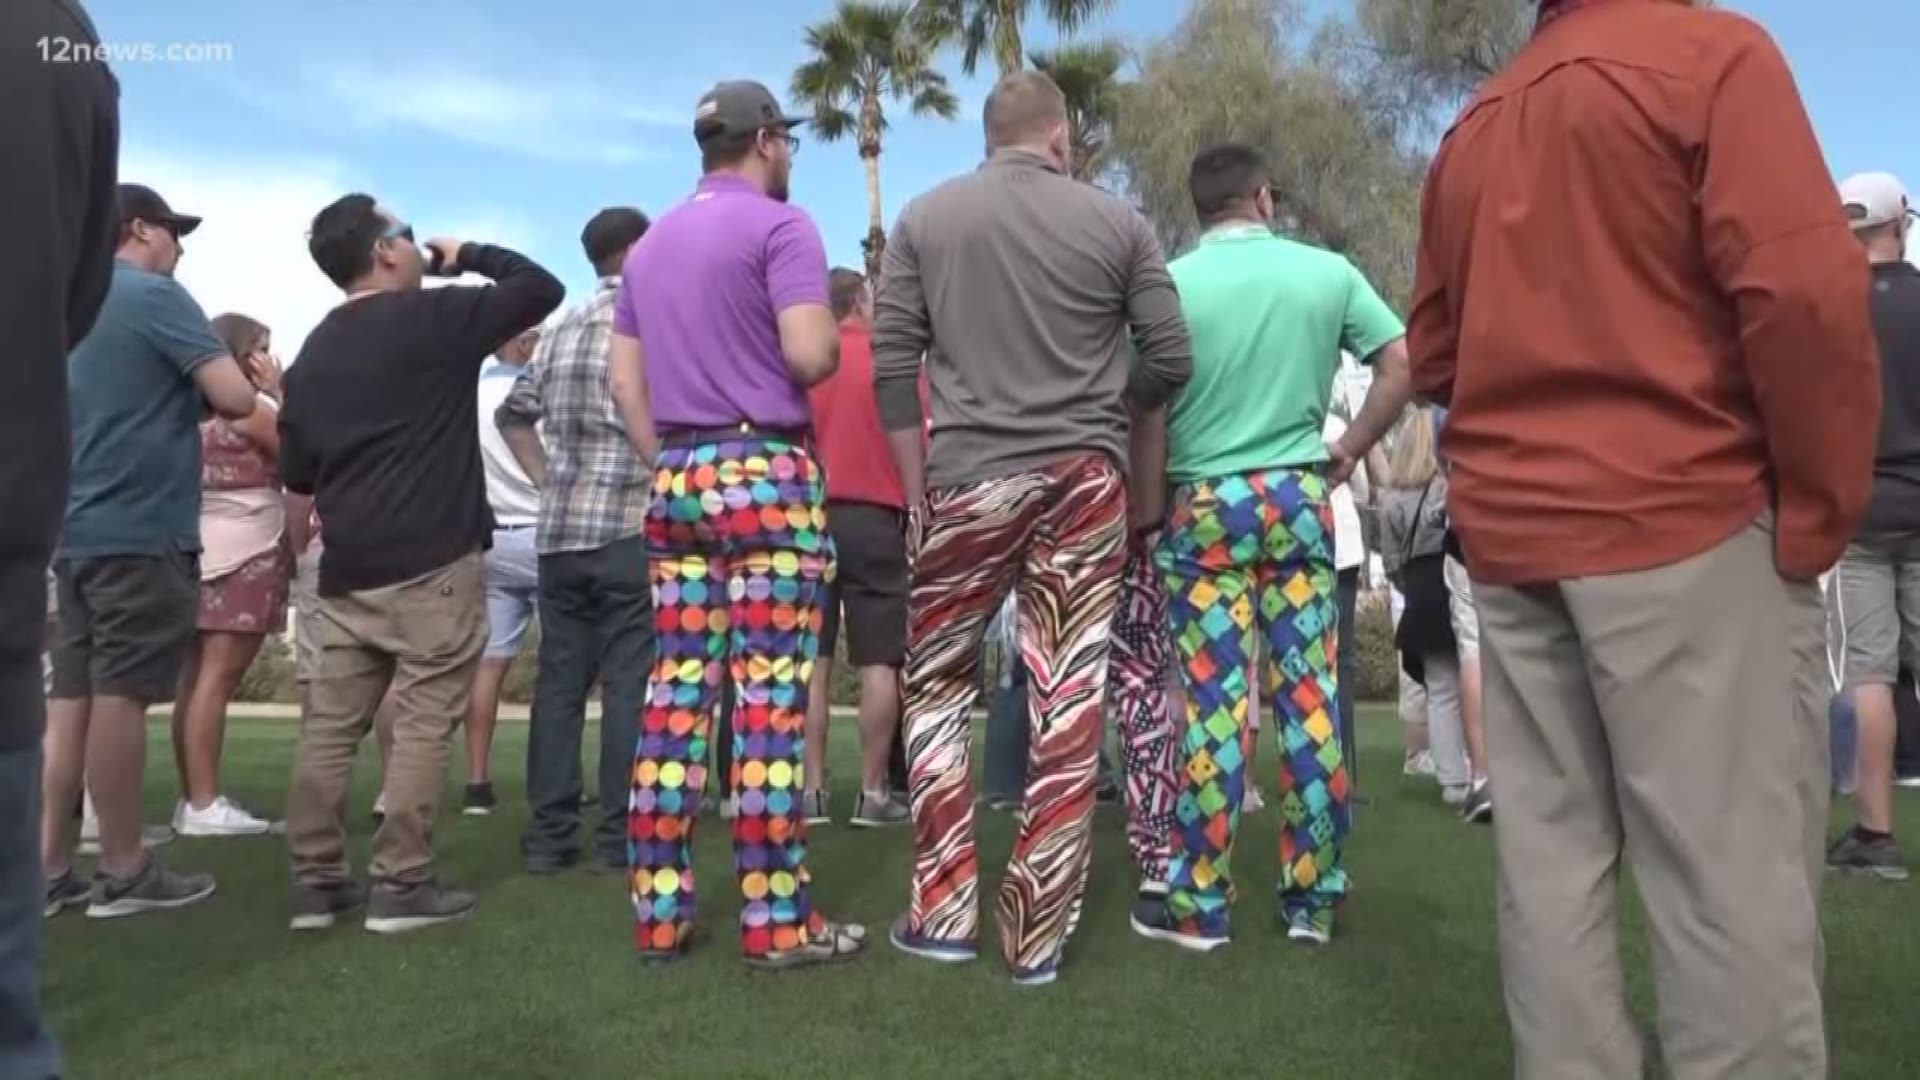 Dress to impress at the Waste Management Phoenix Open